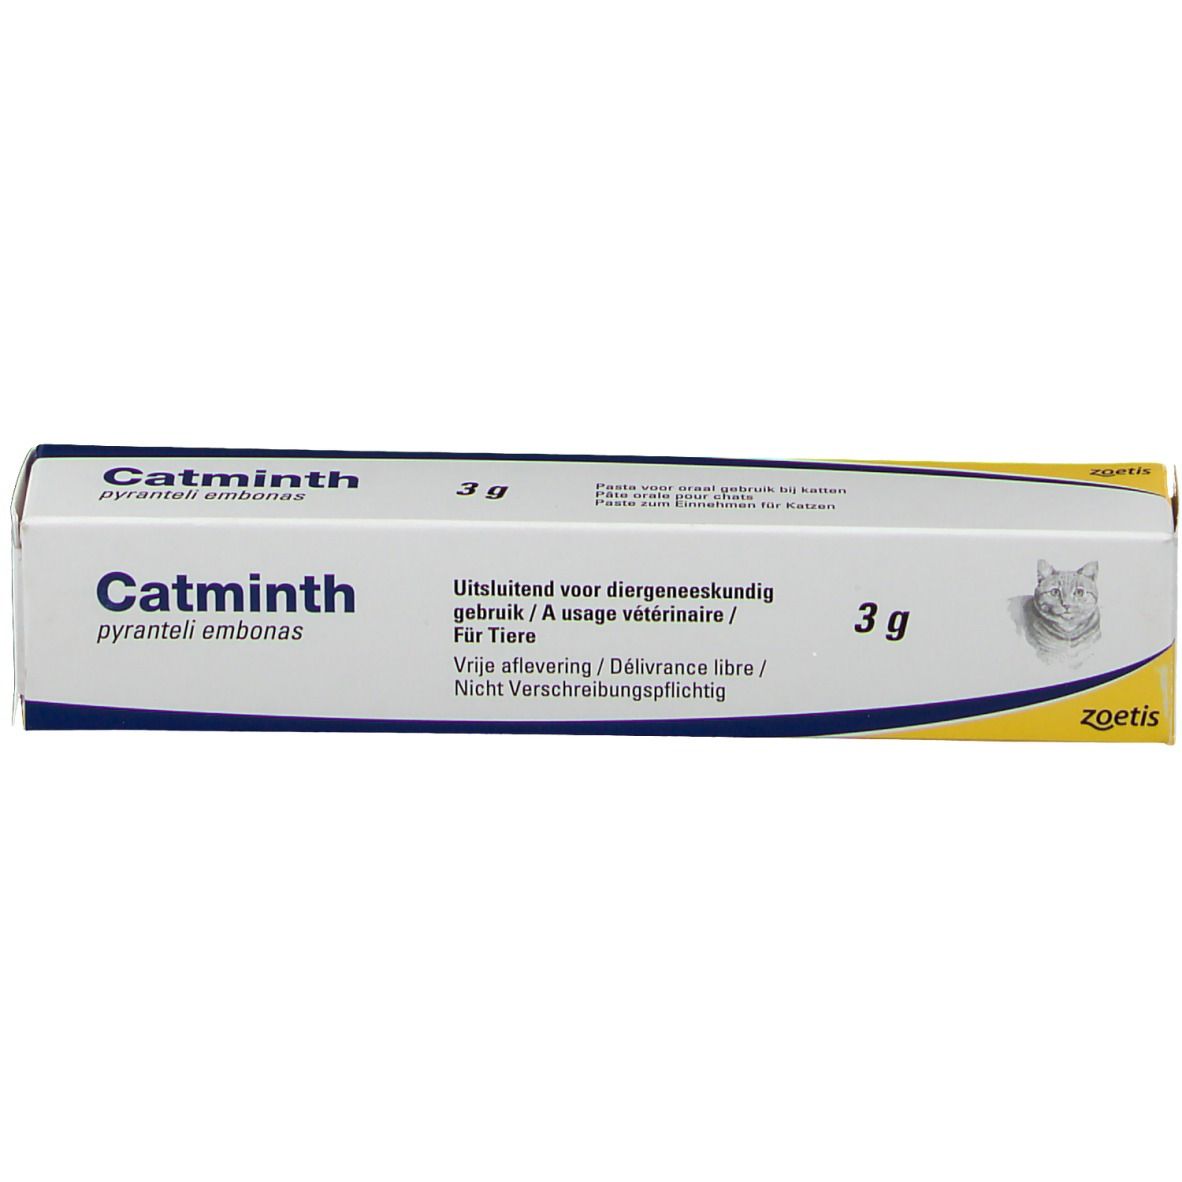 Catminth